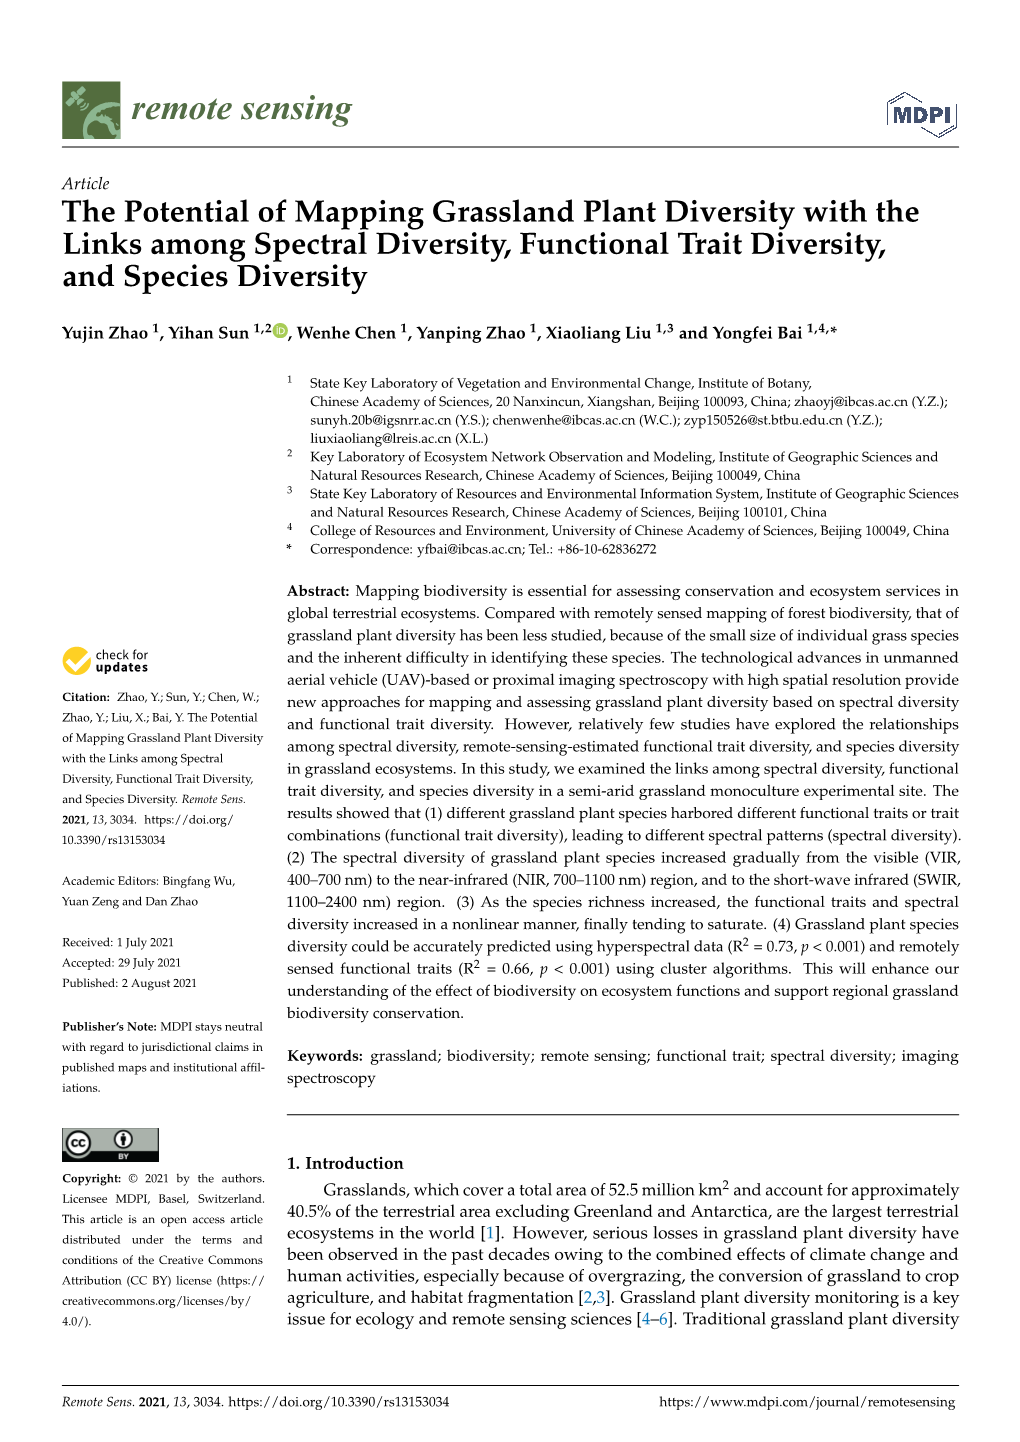 The Potential of Mapping Grassland Plant Diversity with the Links Among Spectral Diversity, Functional Trait Diversity, and Species Diversity